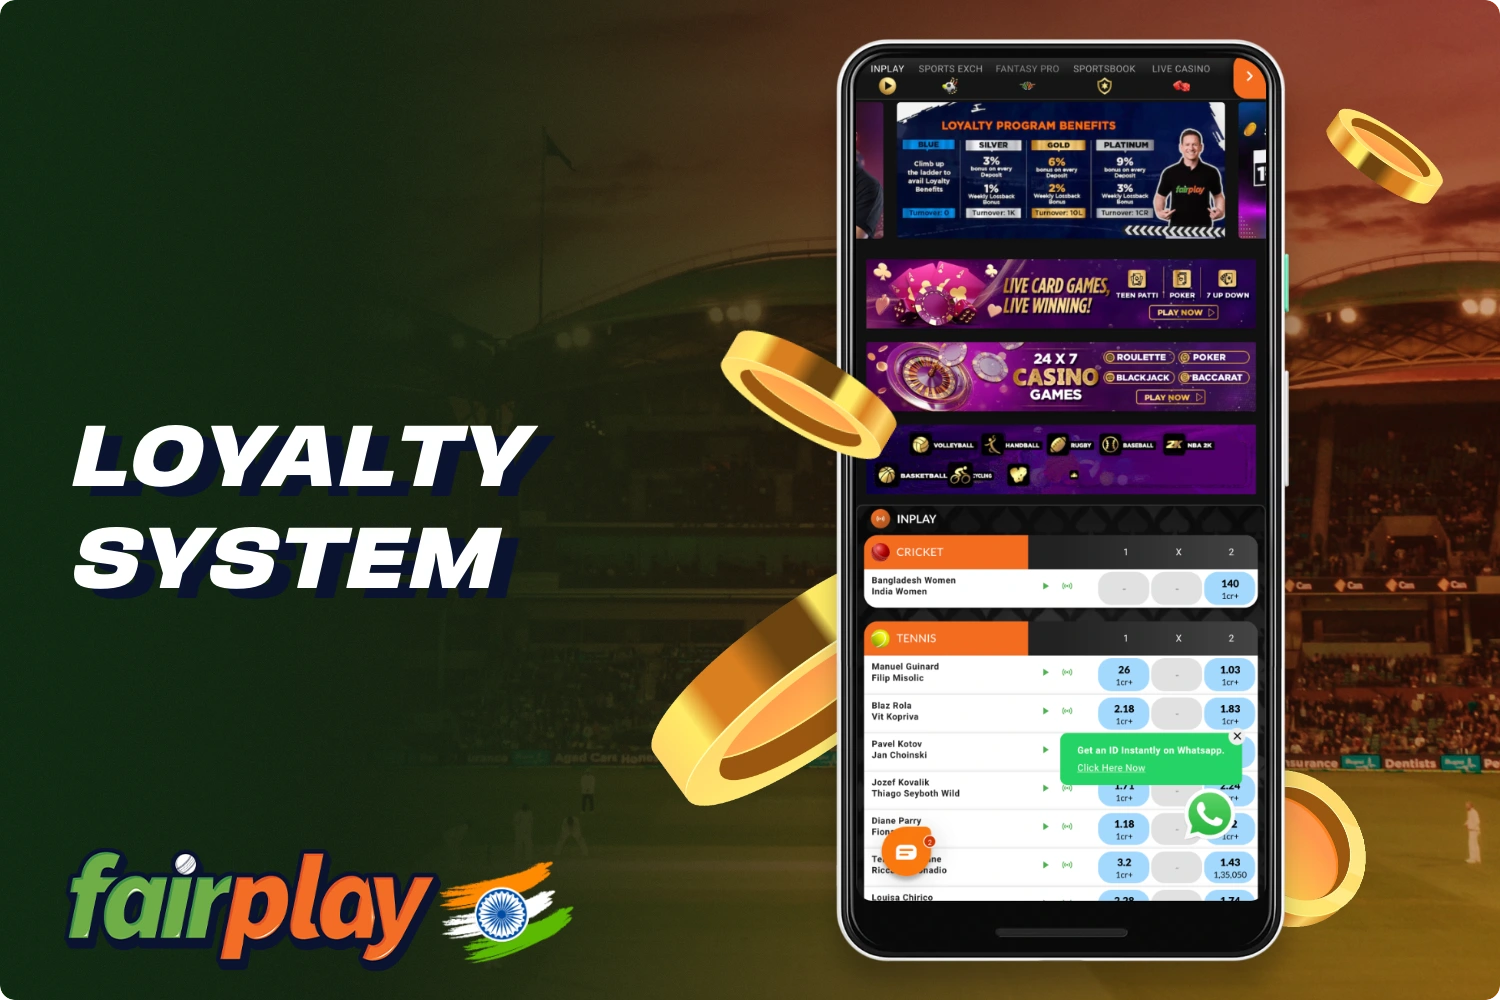 Fairplay's loyalty program is designed to reward loyal customers from India